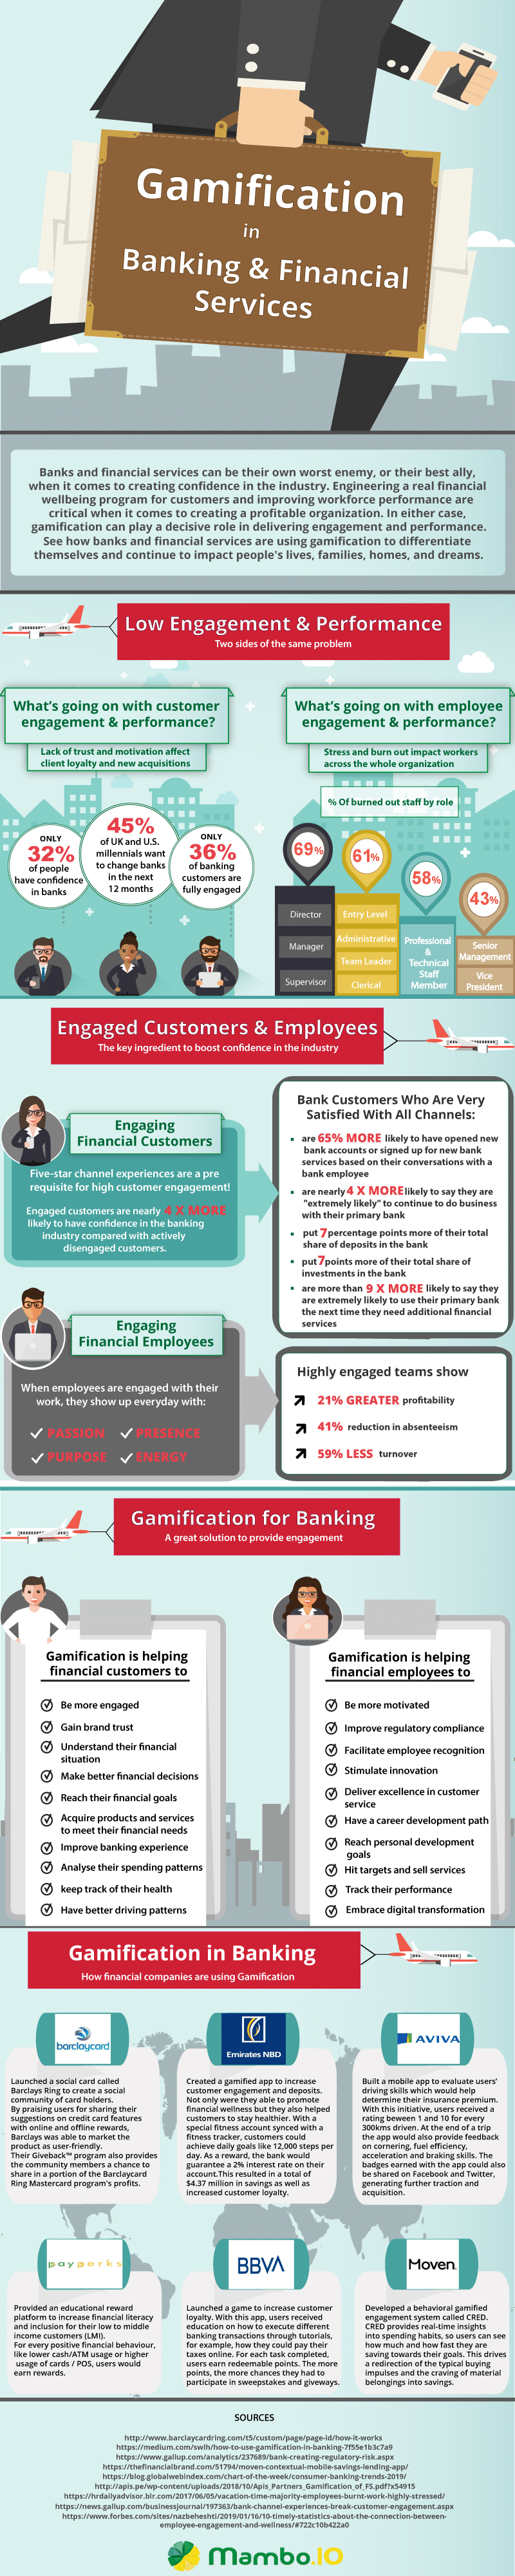 gamification_in_banking_infographic